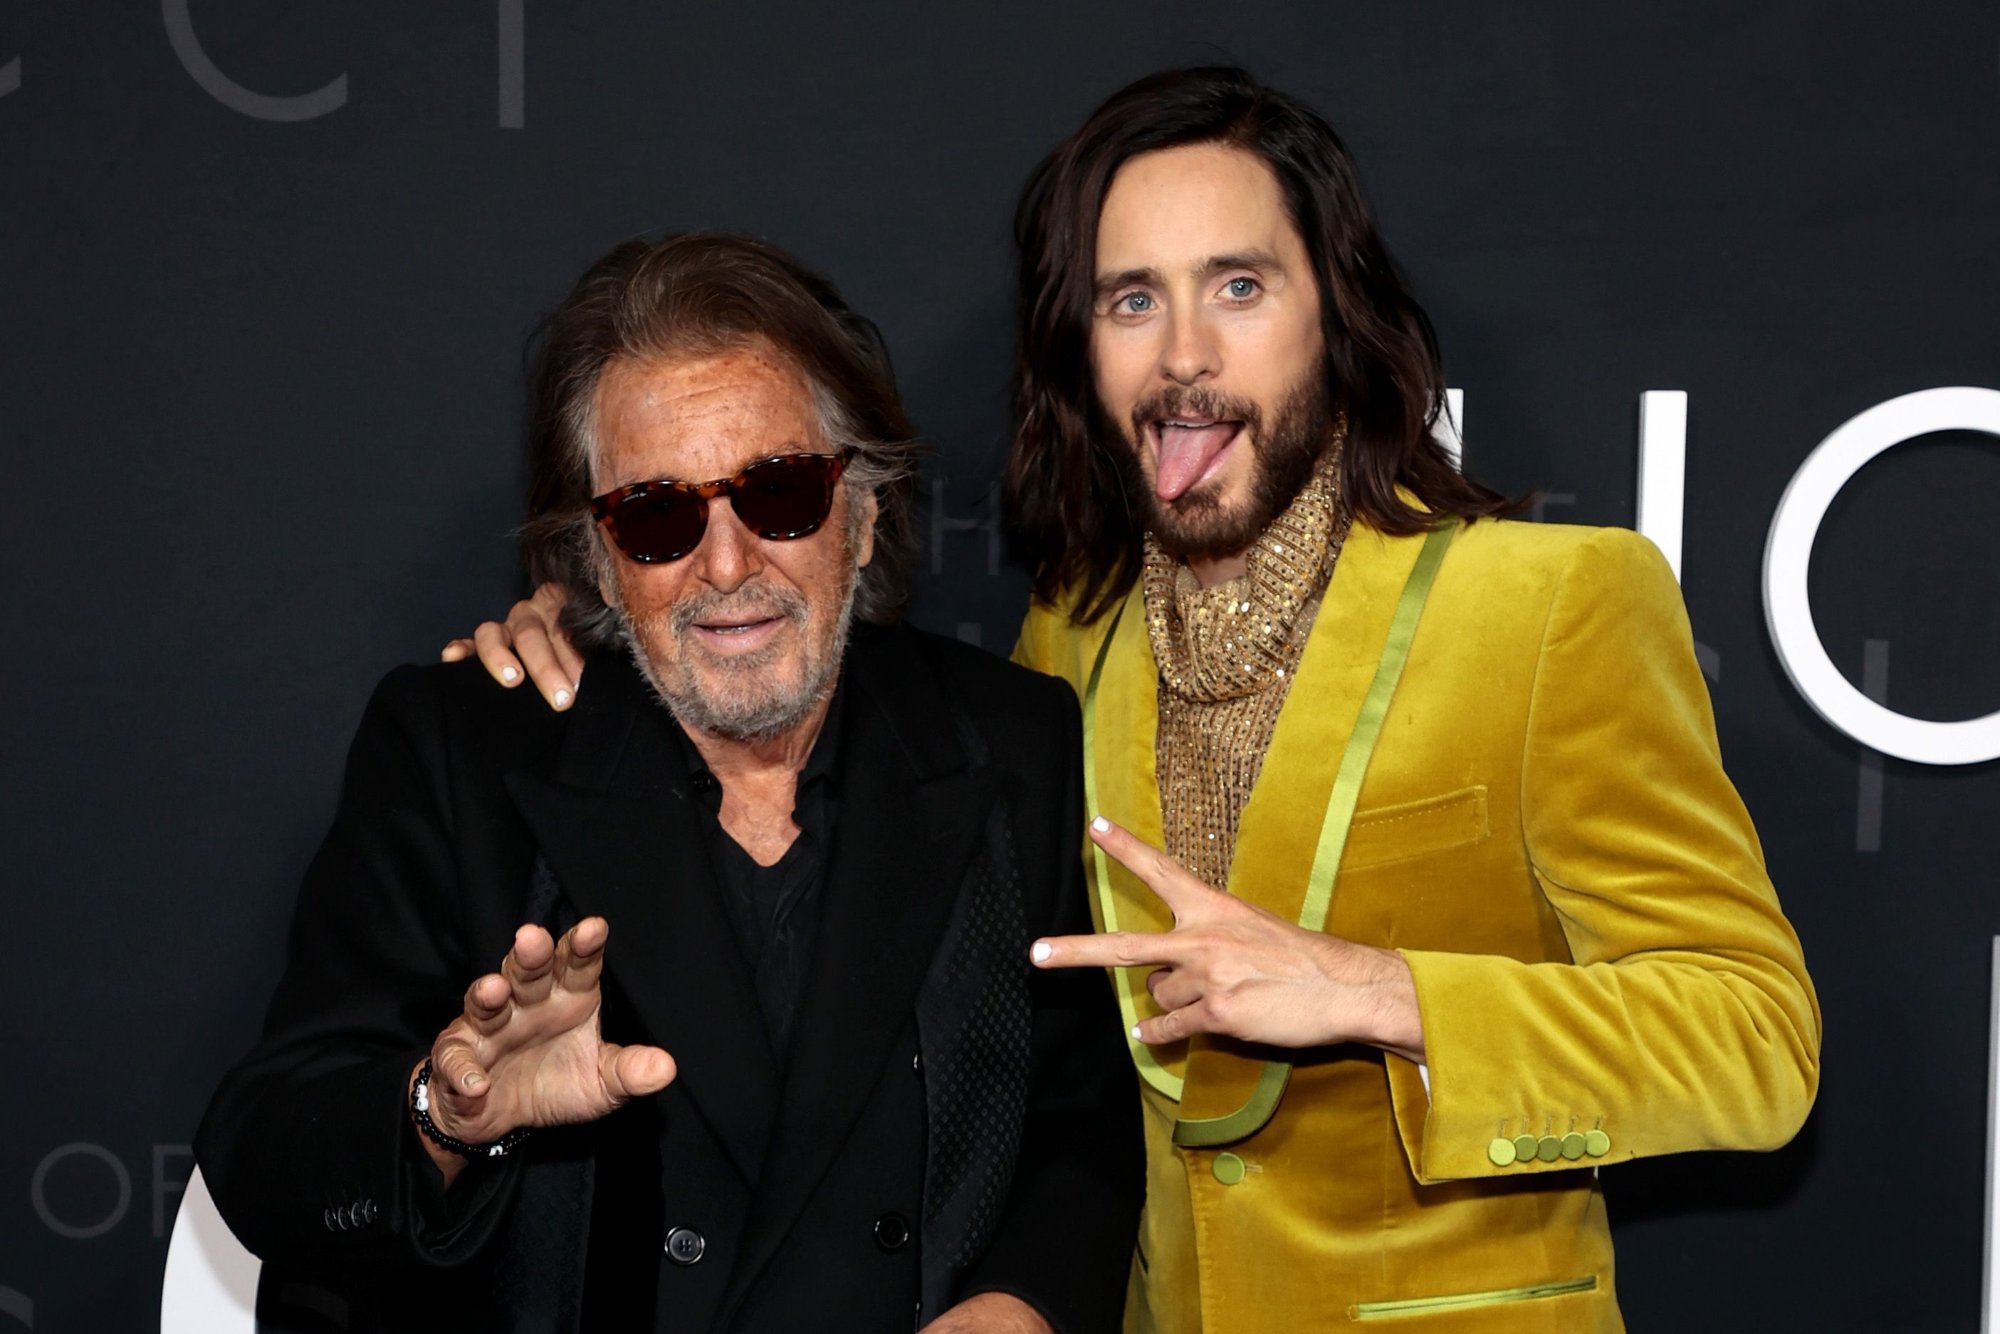 'House of Gucci' Al Pacino and Jared Leto holding up a hand in front of 'House of Gucci' logo